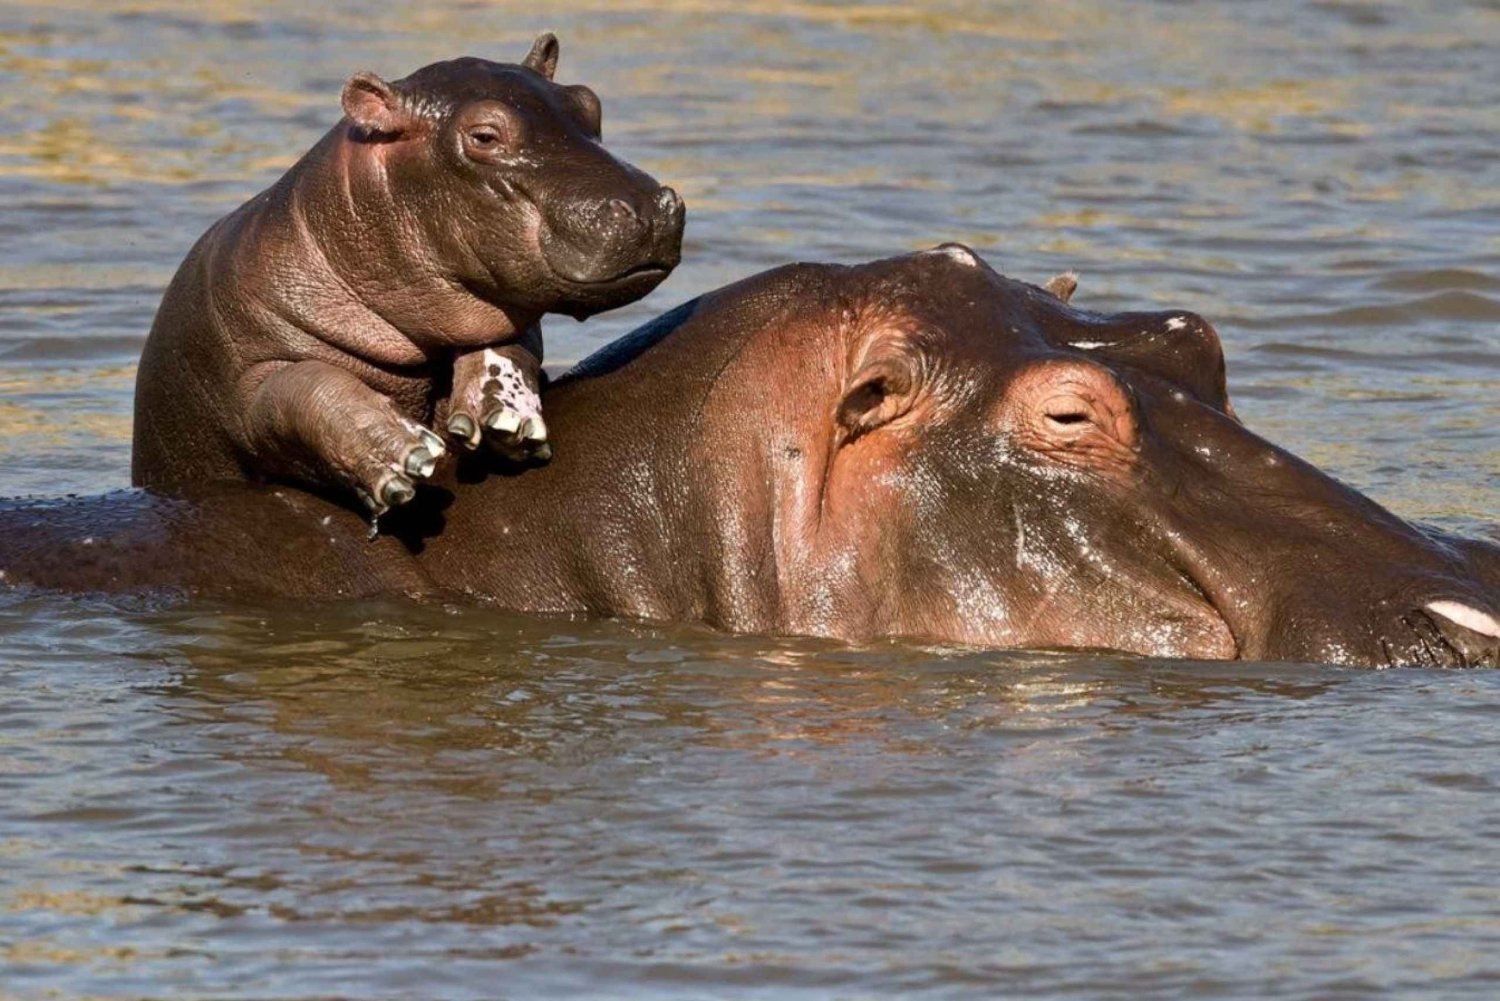 Isimangaliso Day Tour & Hippo & Croc Boat Cruise From Durban